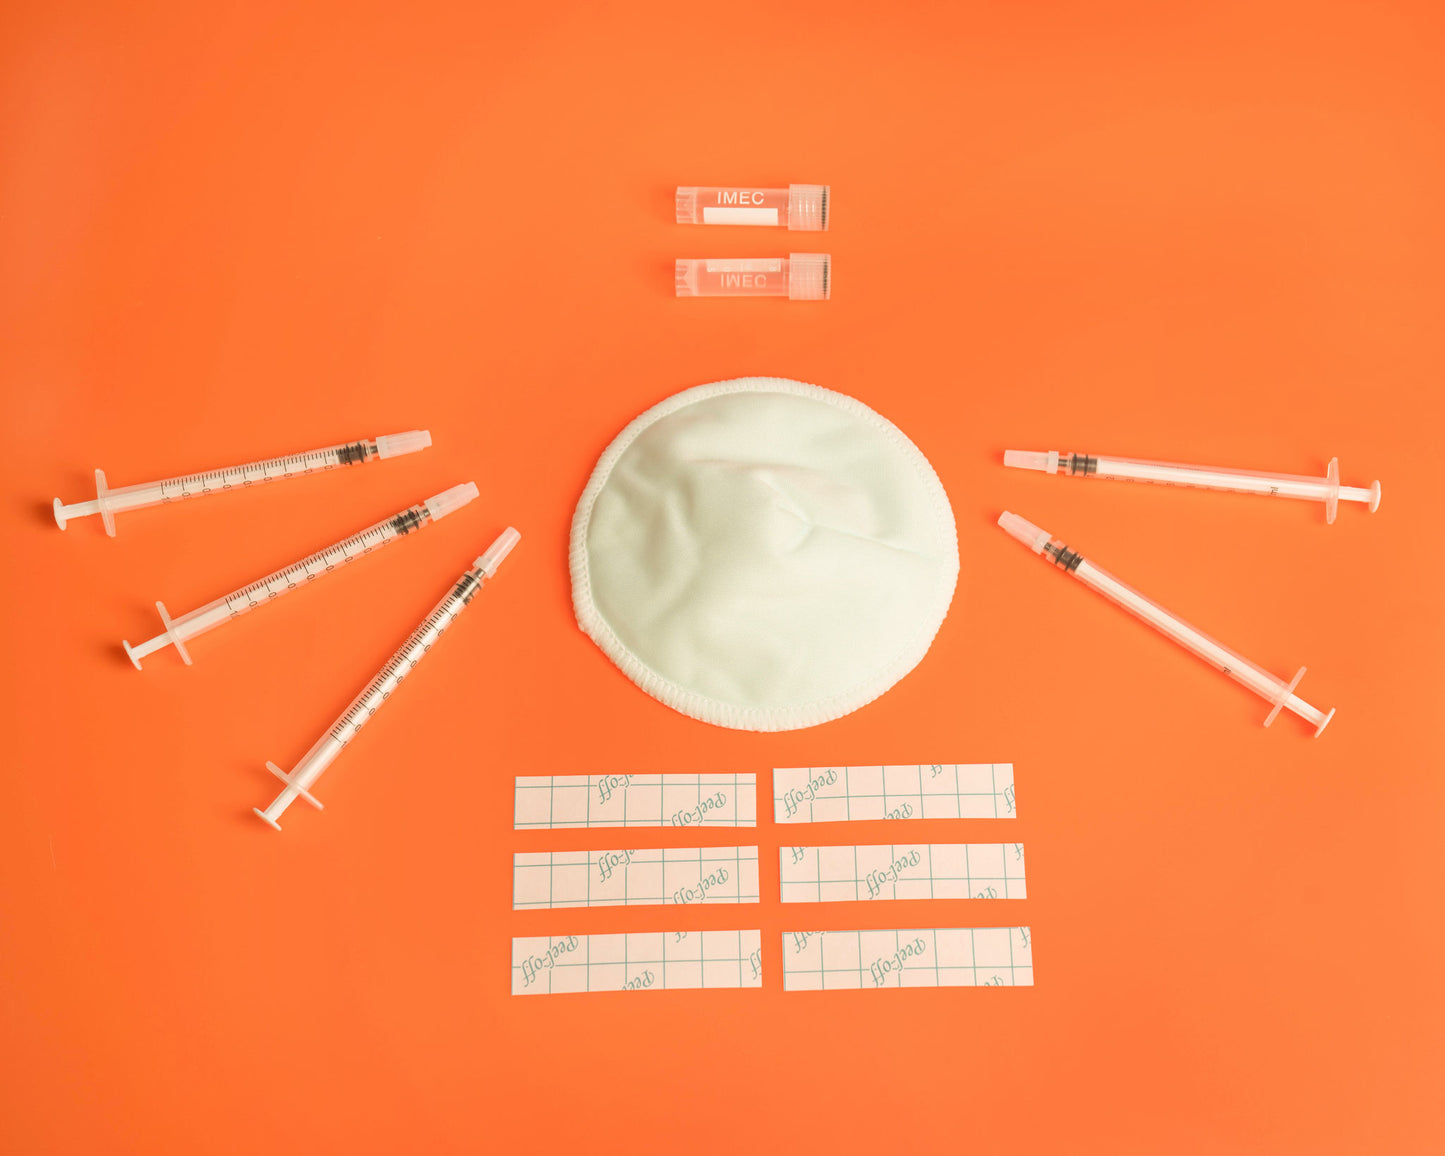 5 colostrum syringes, one reusable breastpad, two storage pots and stickers, on an orange background.